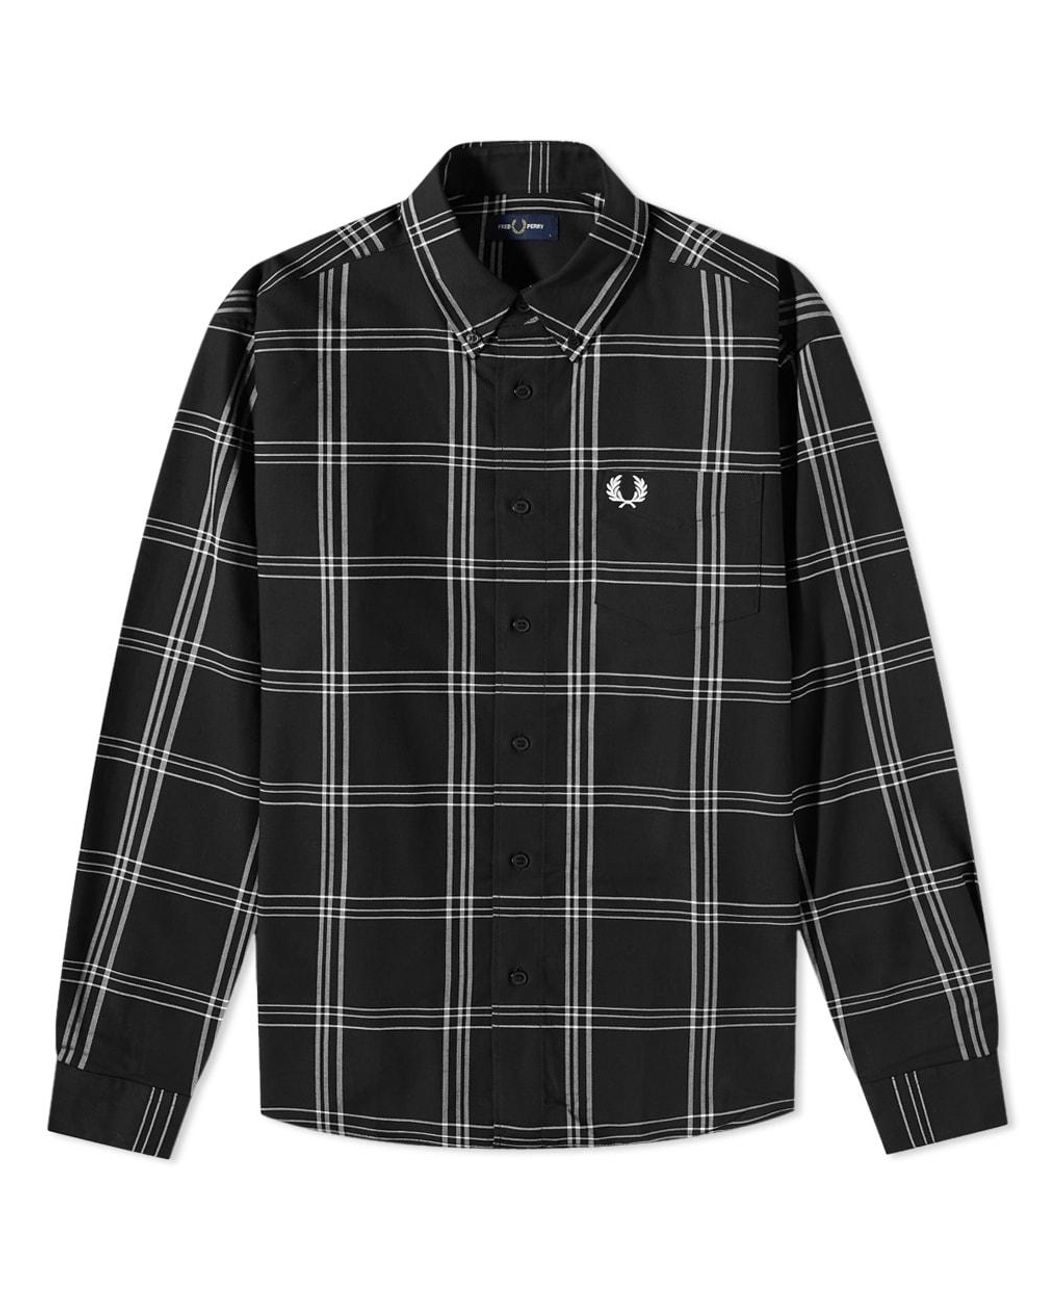 Fred Perry Twill Check Shirt in Black for Men | Lyst